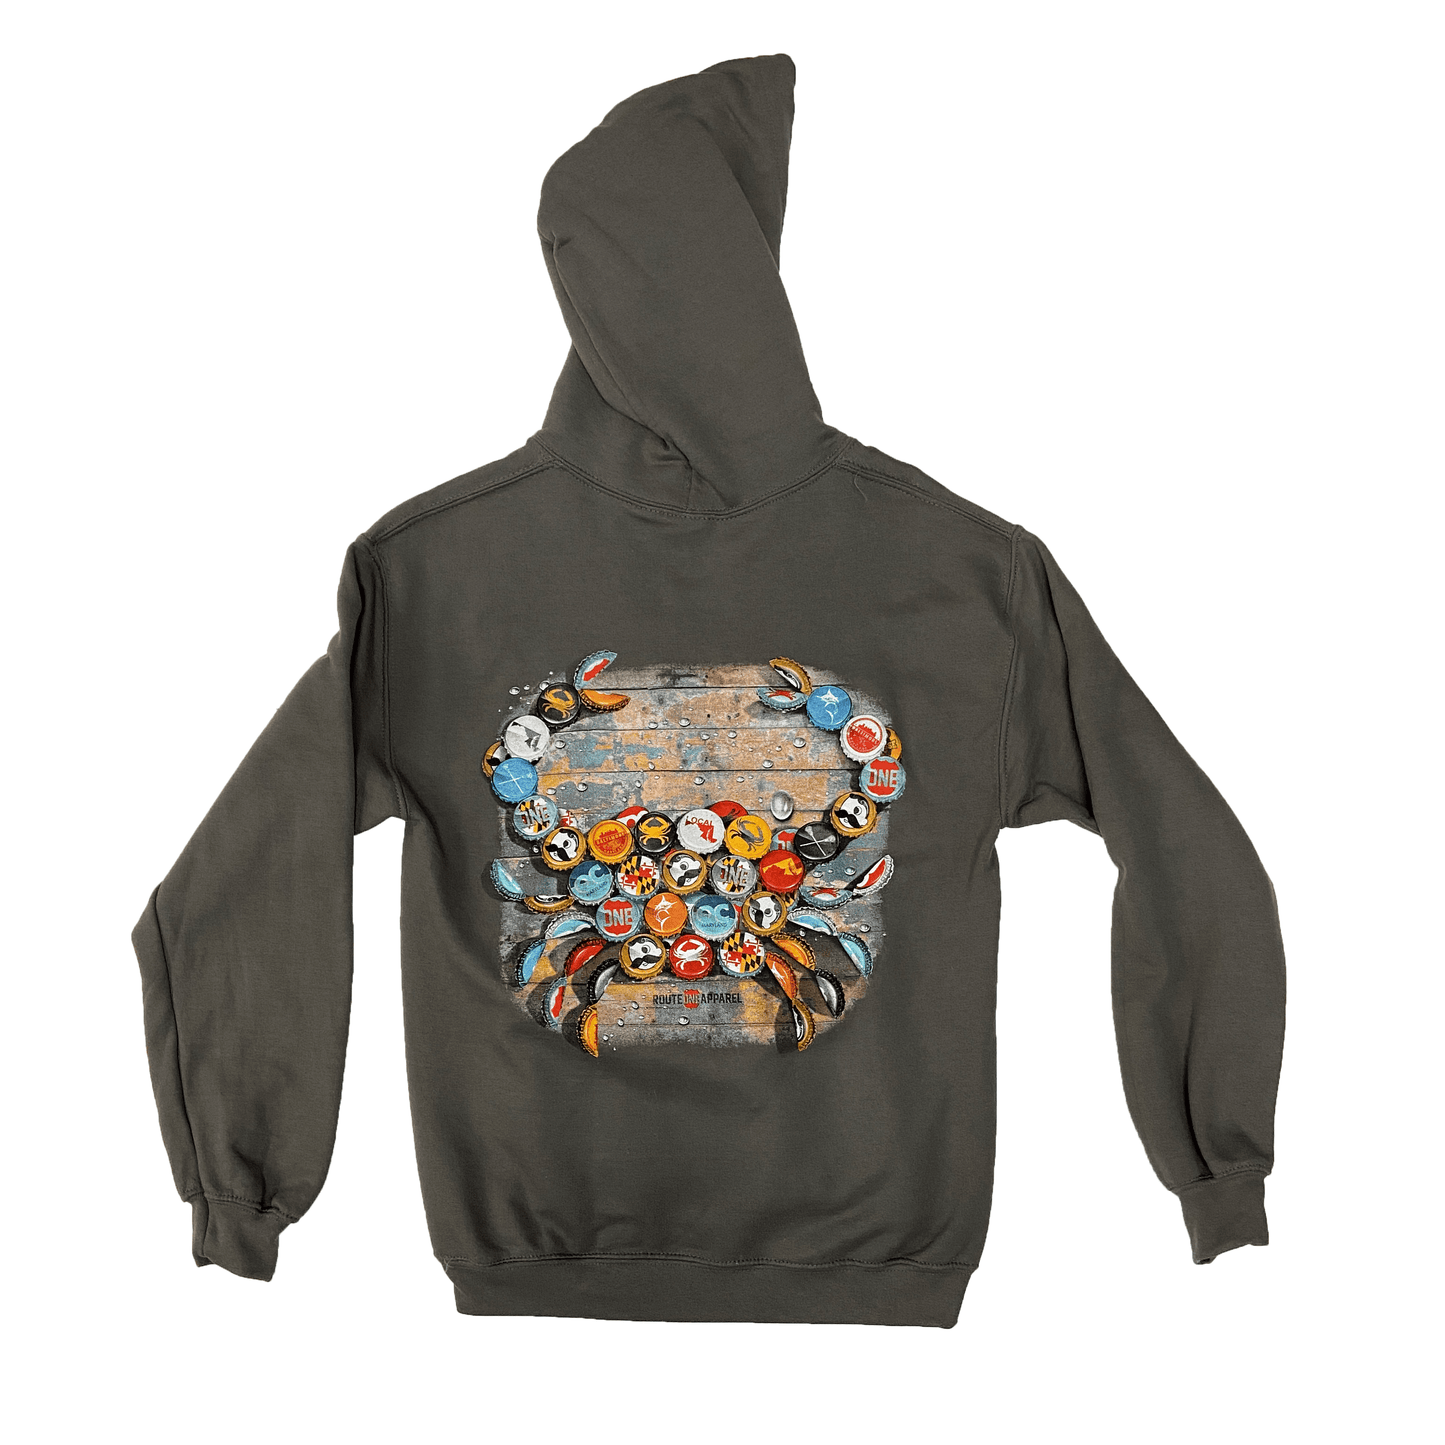 Natty Boh Bottle Cap (Charcoal) / Hoodie - Route One Apparel